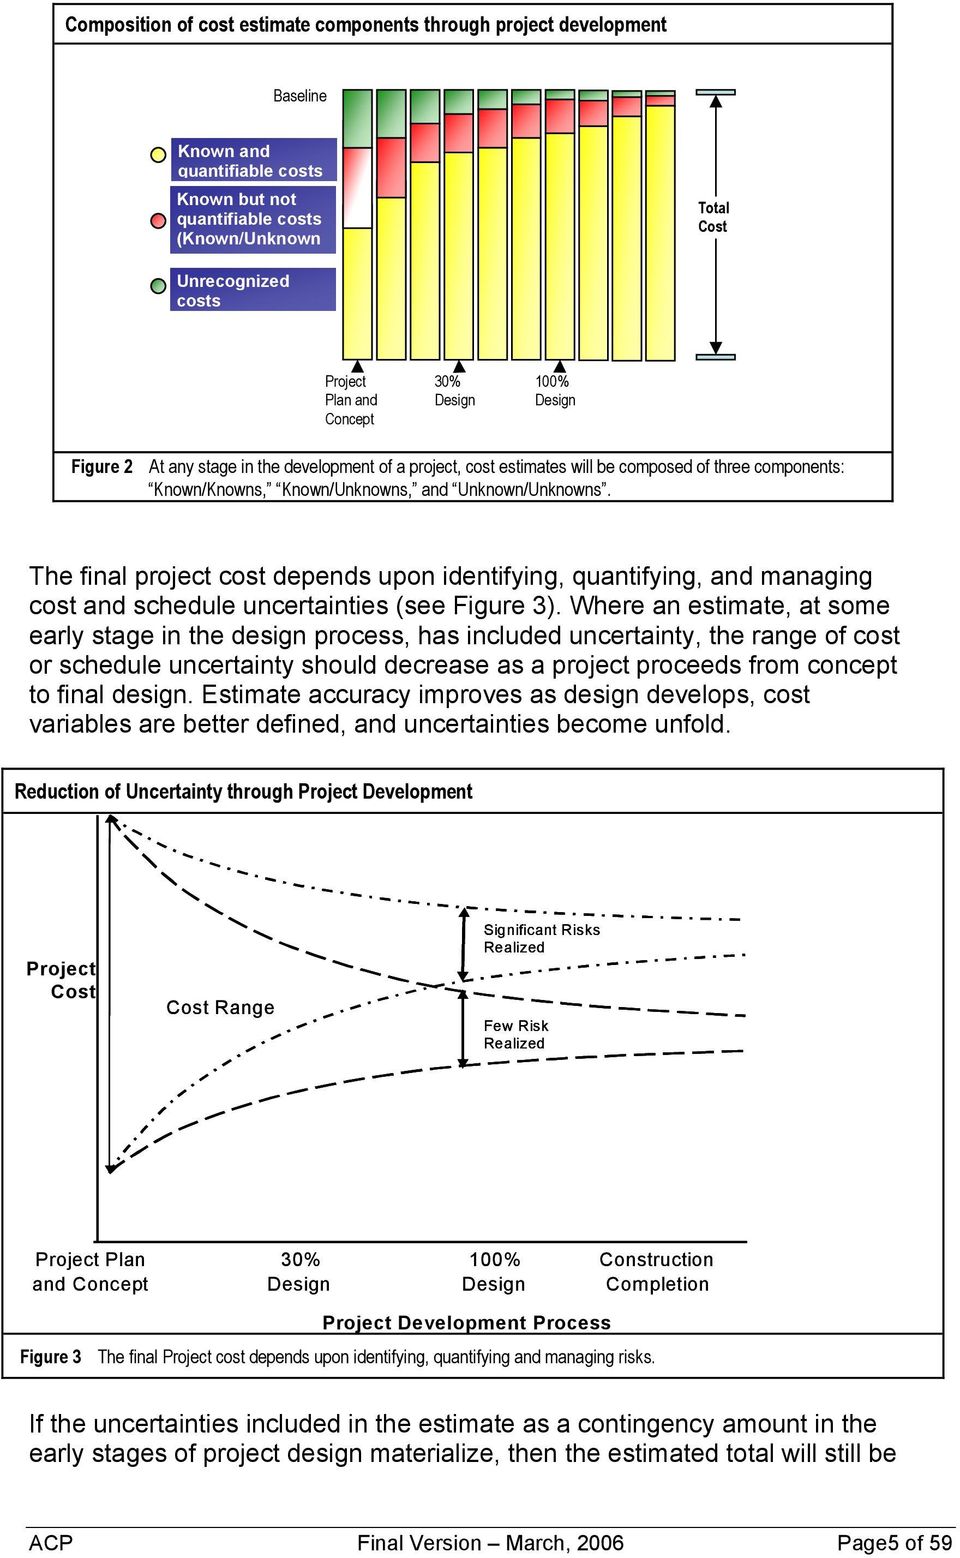 The final project cost depends upon identifying, quantifying, and managing cost and schedule uncertainties (see Figure 3).